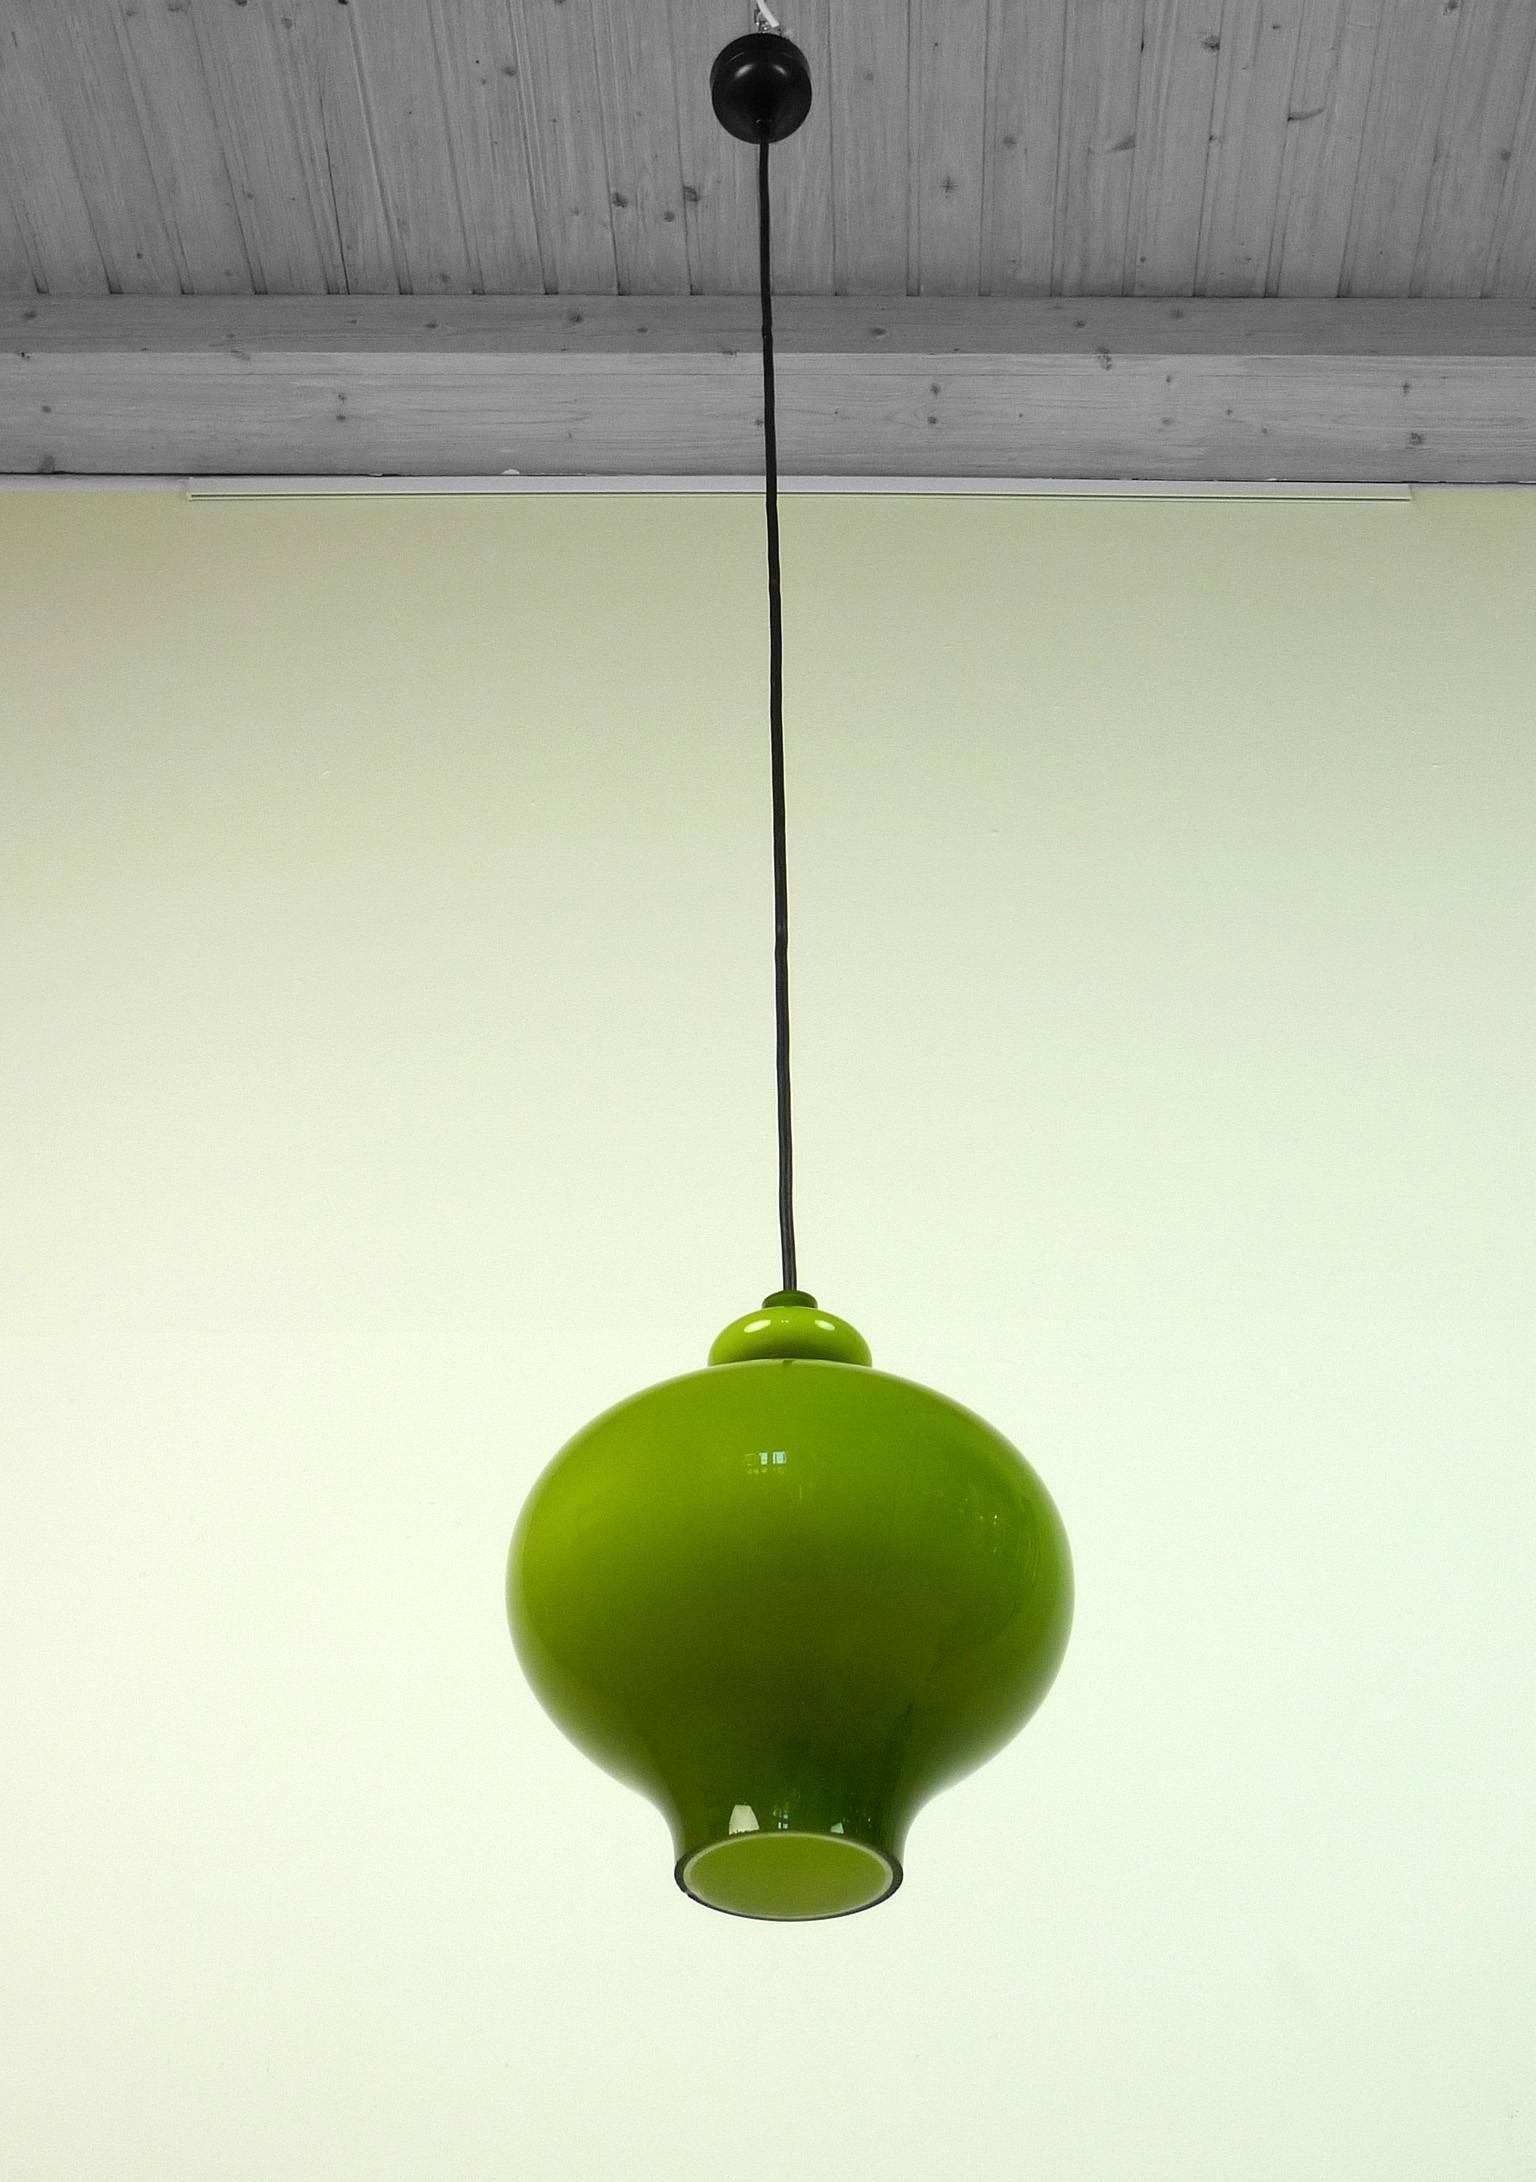 The green onion body of the pendant lamp is made of handblown glass from Holmegaard and has one E 27 bulb holder inside. The lamp was produced by the German manufacturer Staff Leuchten in the 1960s and is wired for German standard. The pendant is in